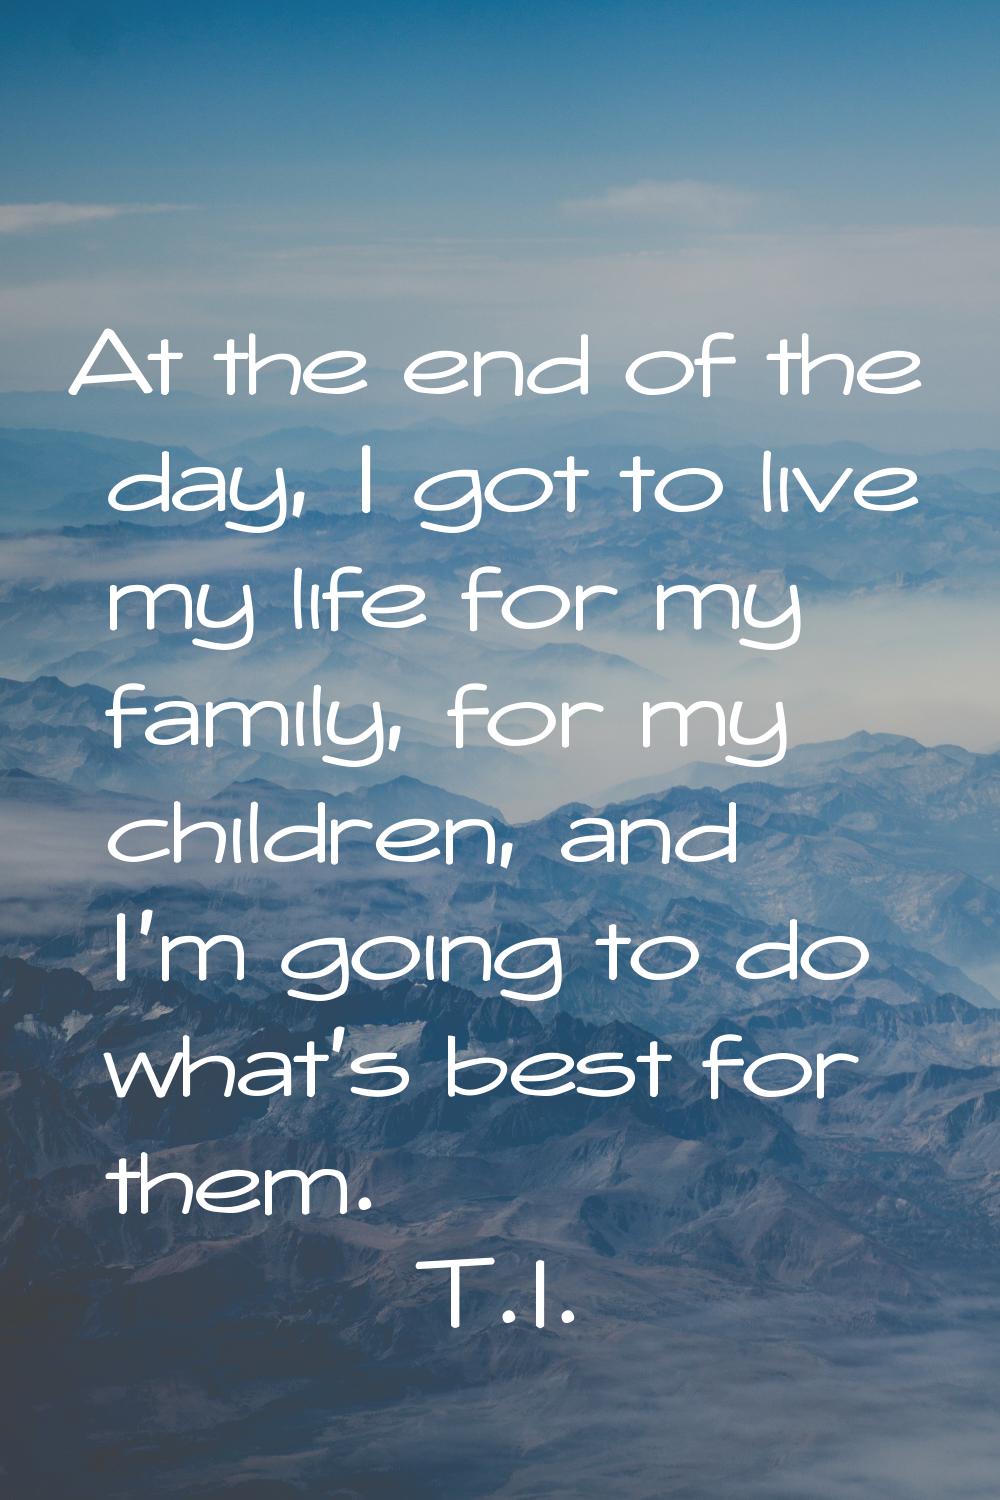 At the end of the day, I got to live my life for my family, for my children, and I'm going to do wh